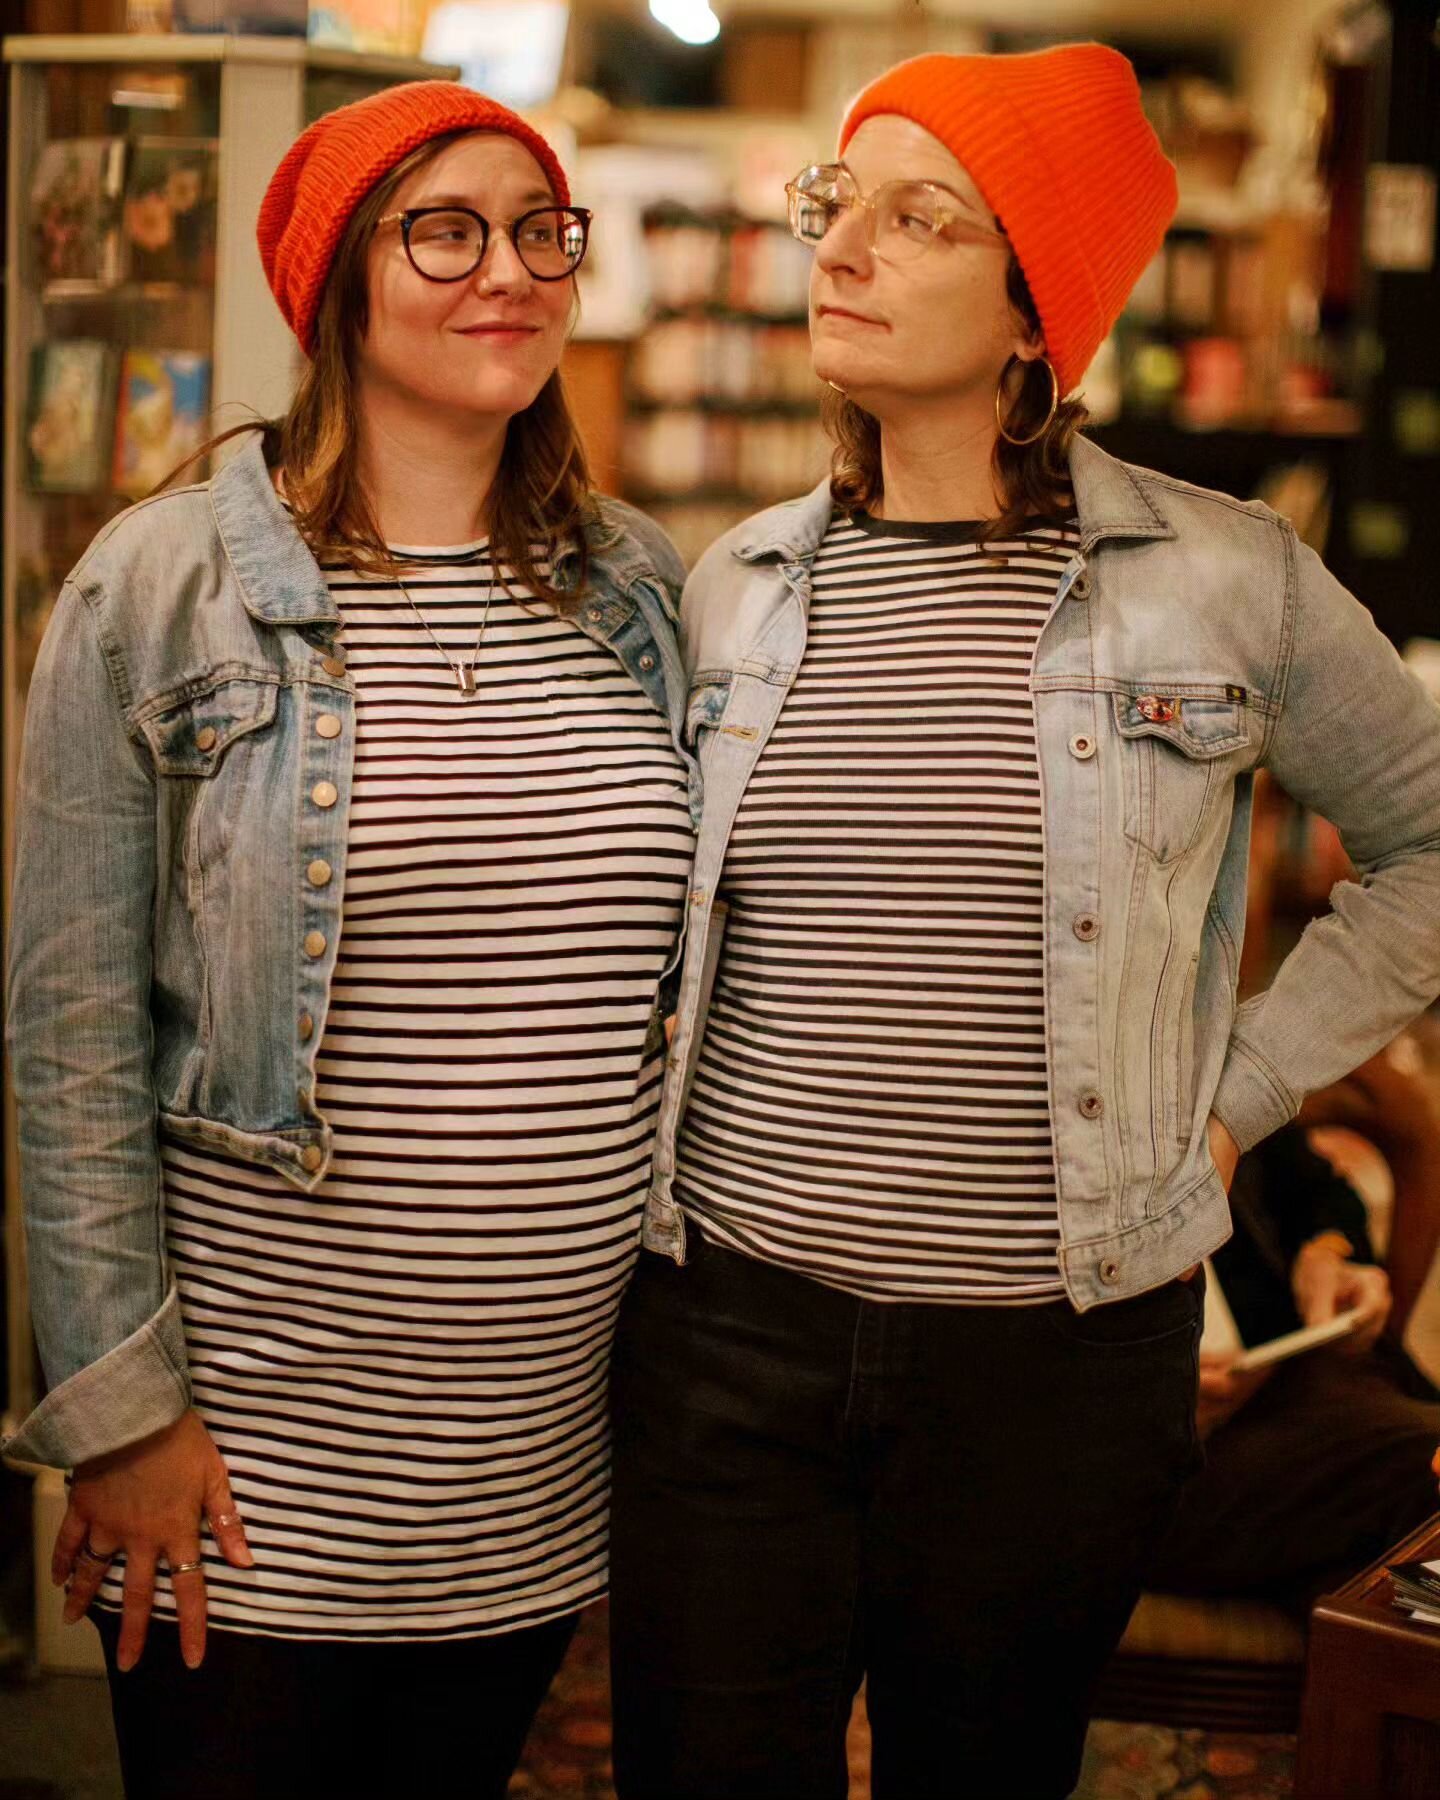 Throwback to the time @mondragonbookstore and a 6-month pregnant me showed up to Lewisburg Fall Fest accidentally dressed exactly alike. 

#accidentaltwins #lewisburgpa #buddies #oldmondragon #arewehumanorarewegenerationxandy